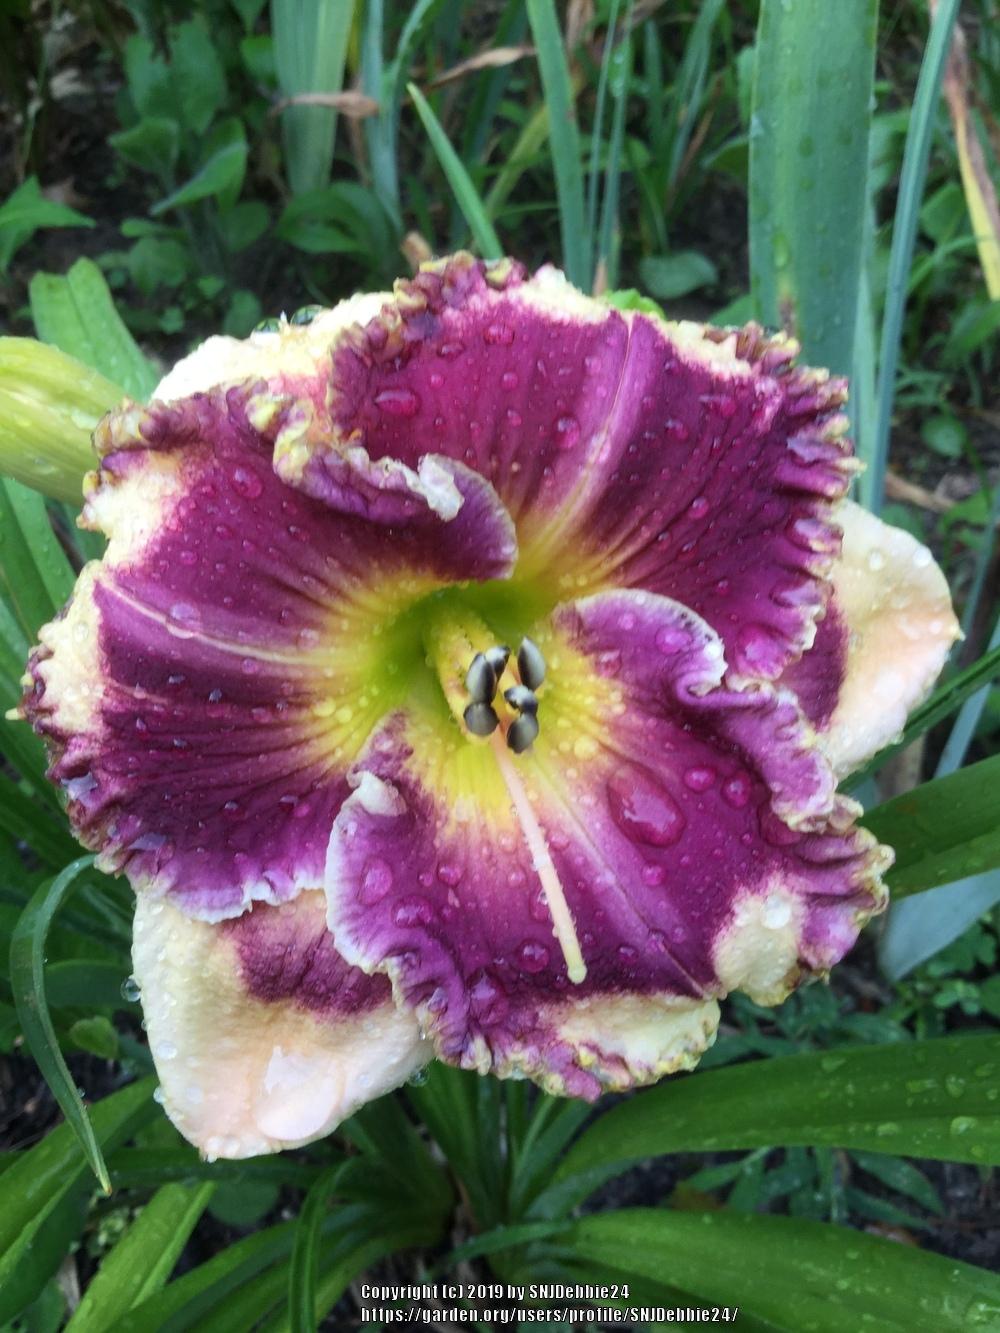 Photo of Daylily (Hemerocallis 'Answering Angels') uploaded by SNJDebbie24